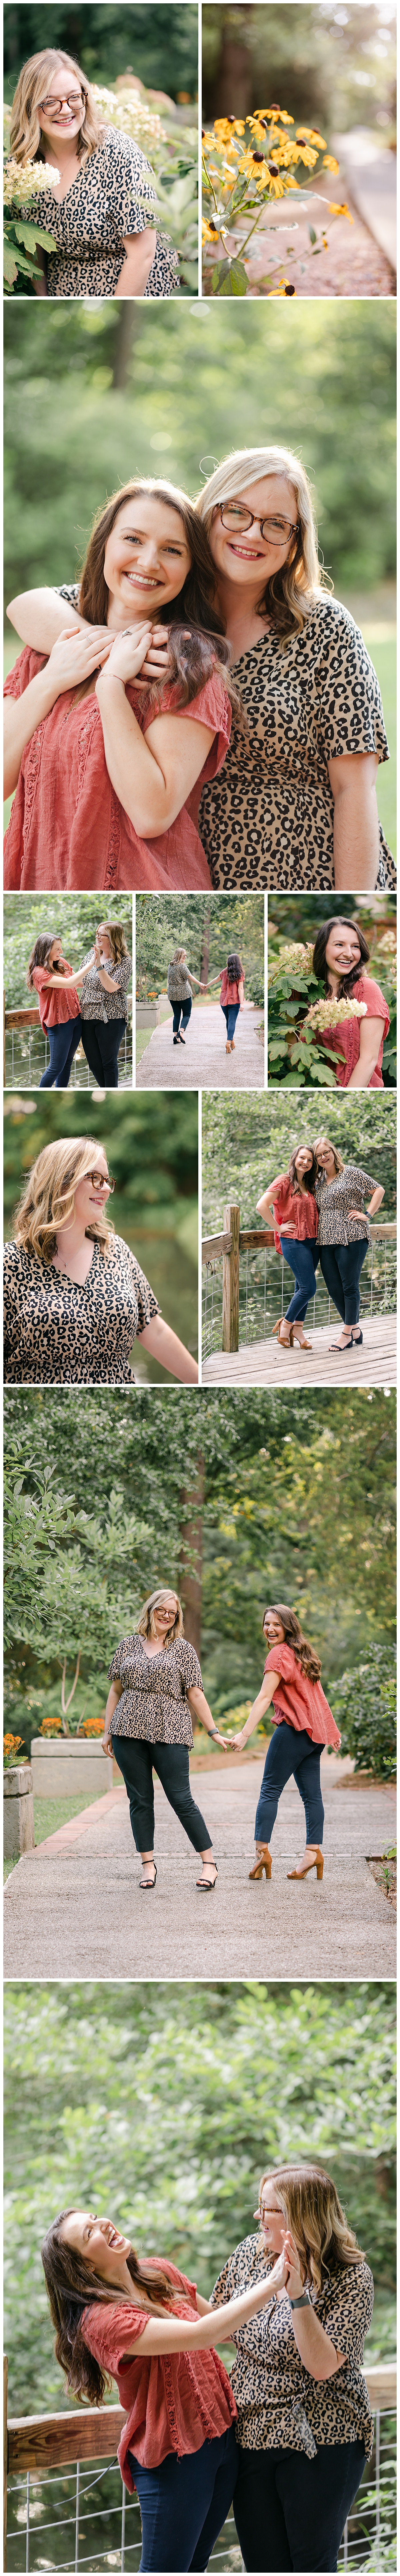 collage of images featuring two college age friends happily posing in the Auburn Arboretum 